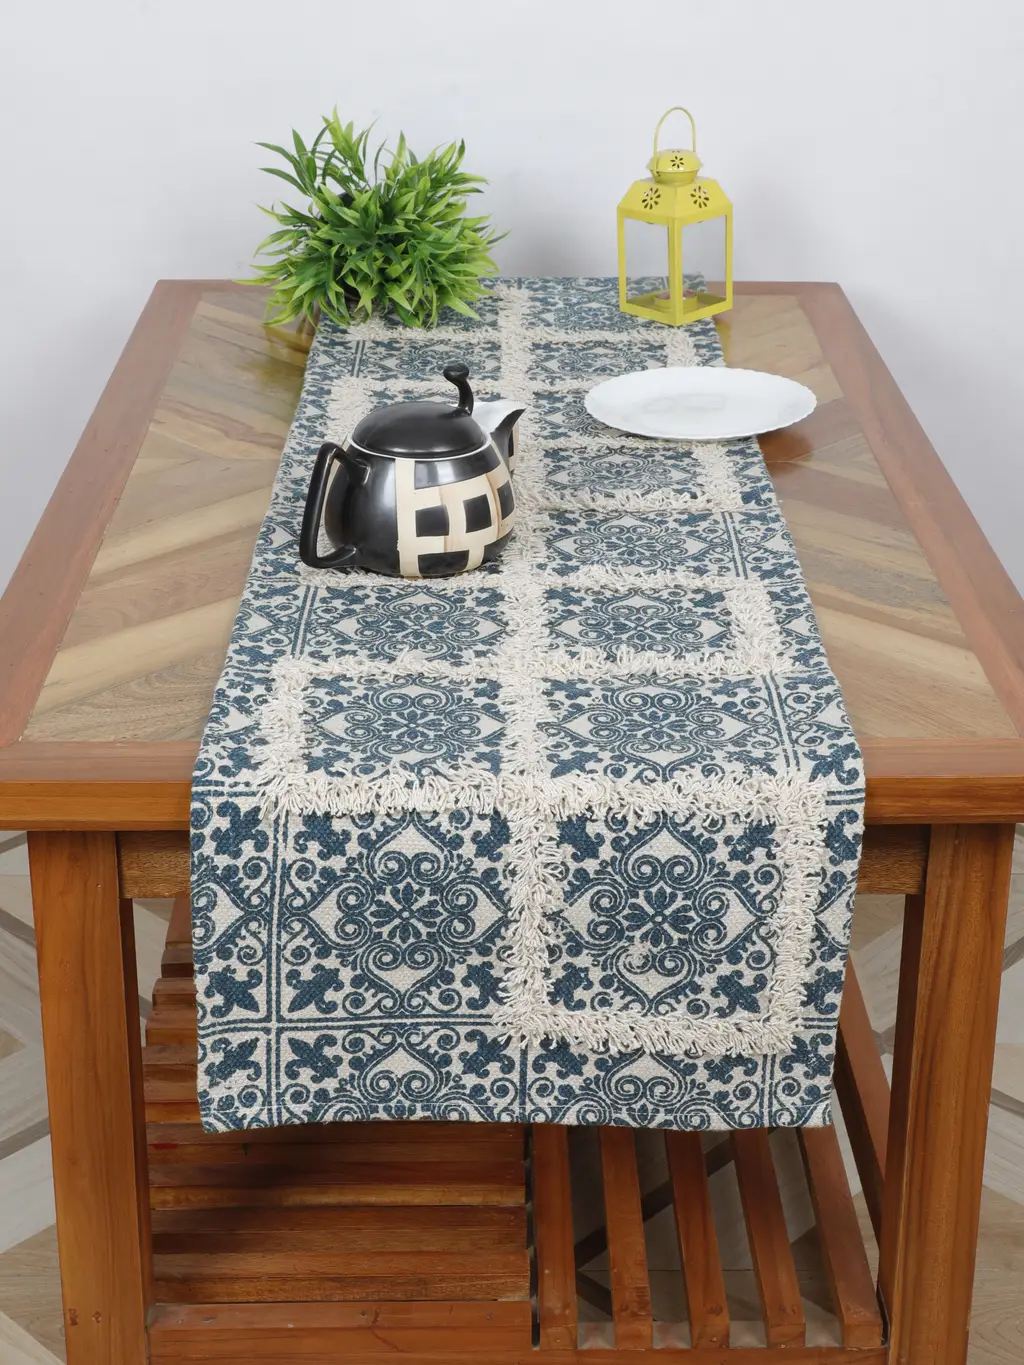 Printed Tufted Canvas Table Runner, squares, floral, 14x54, Navy blue, white